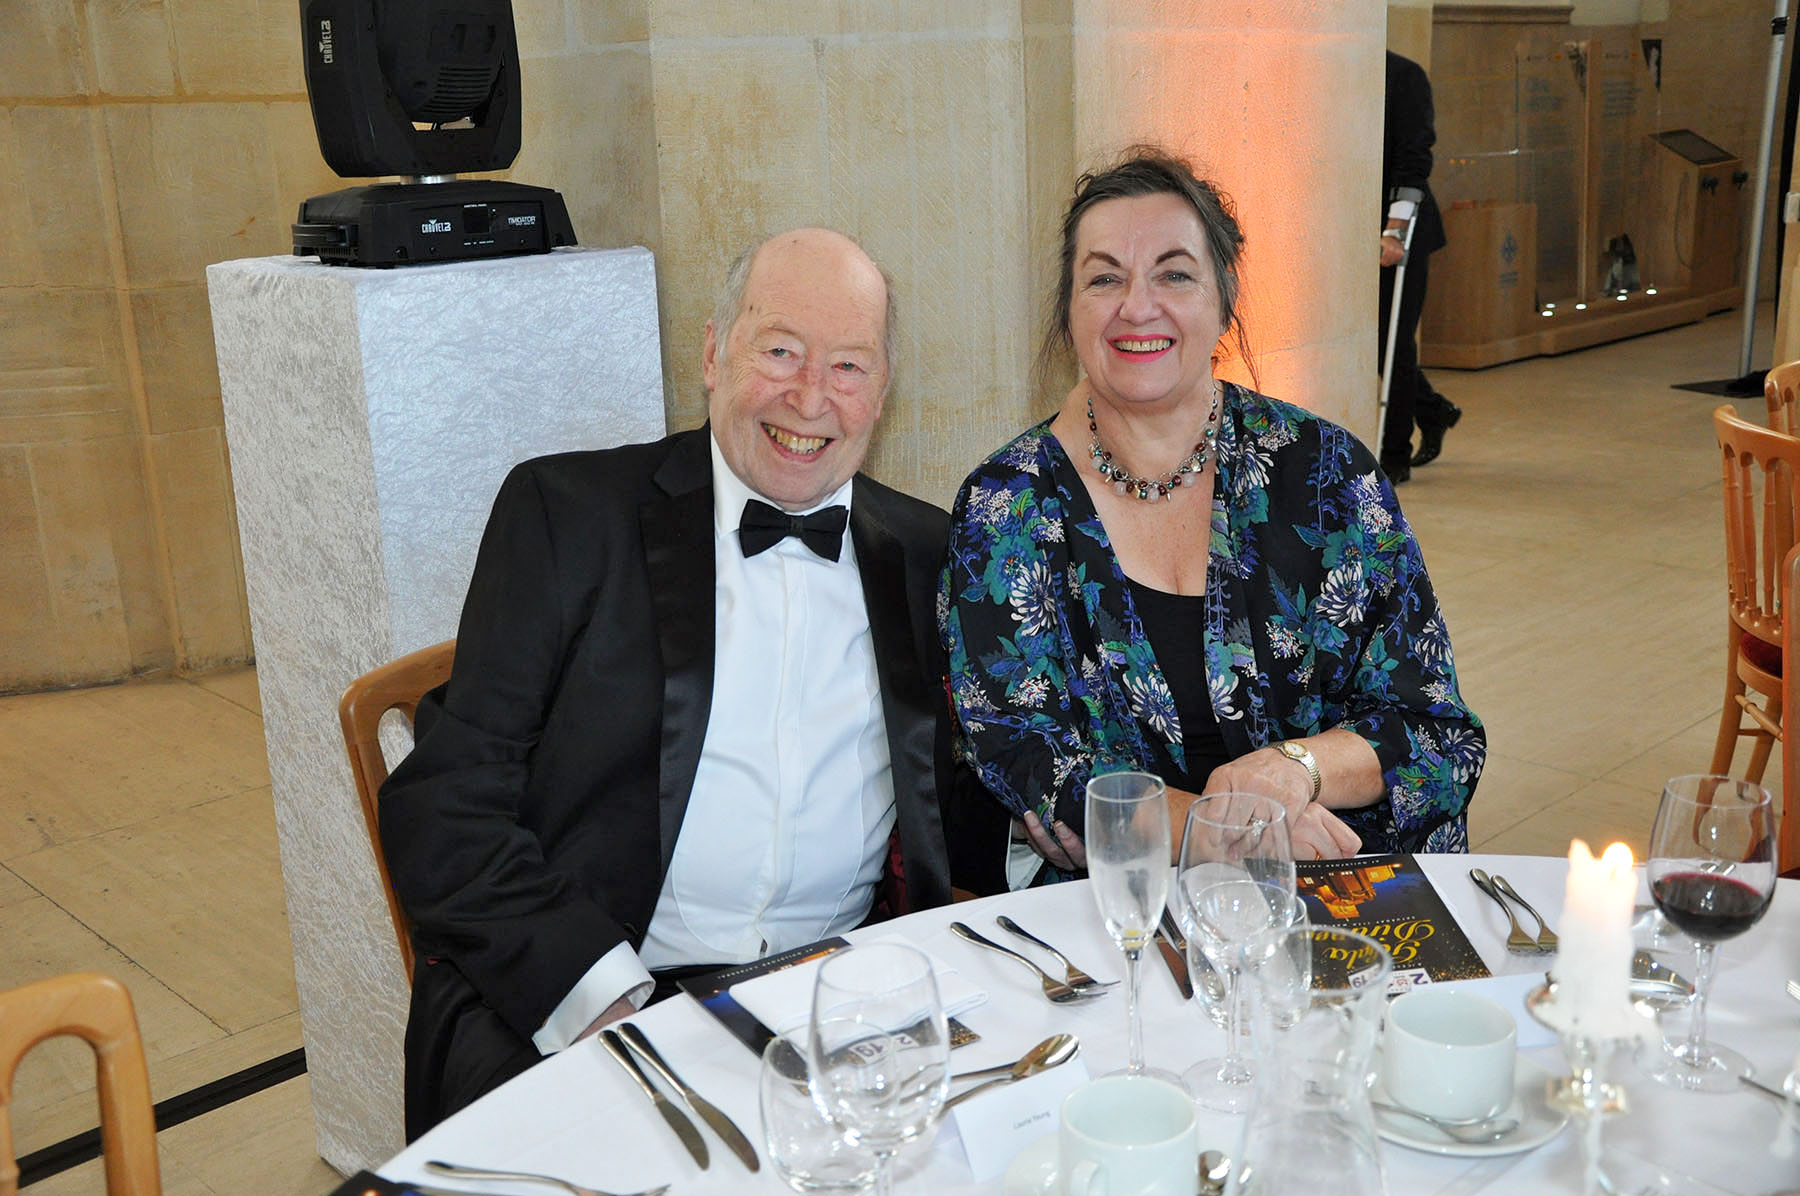 Our Provincial Grand Supreme Ruler attends the Surrey Craft Gala Dinner